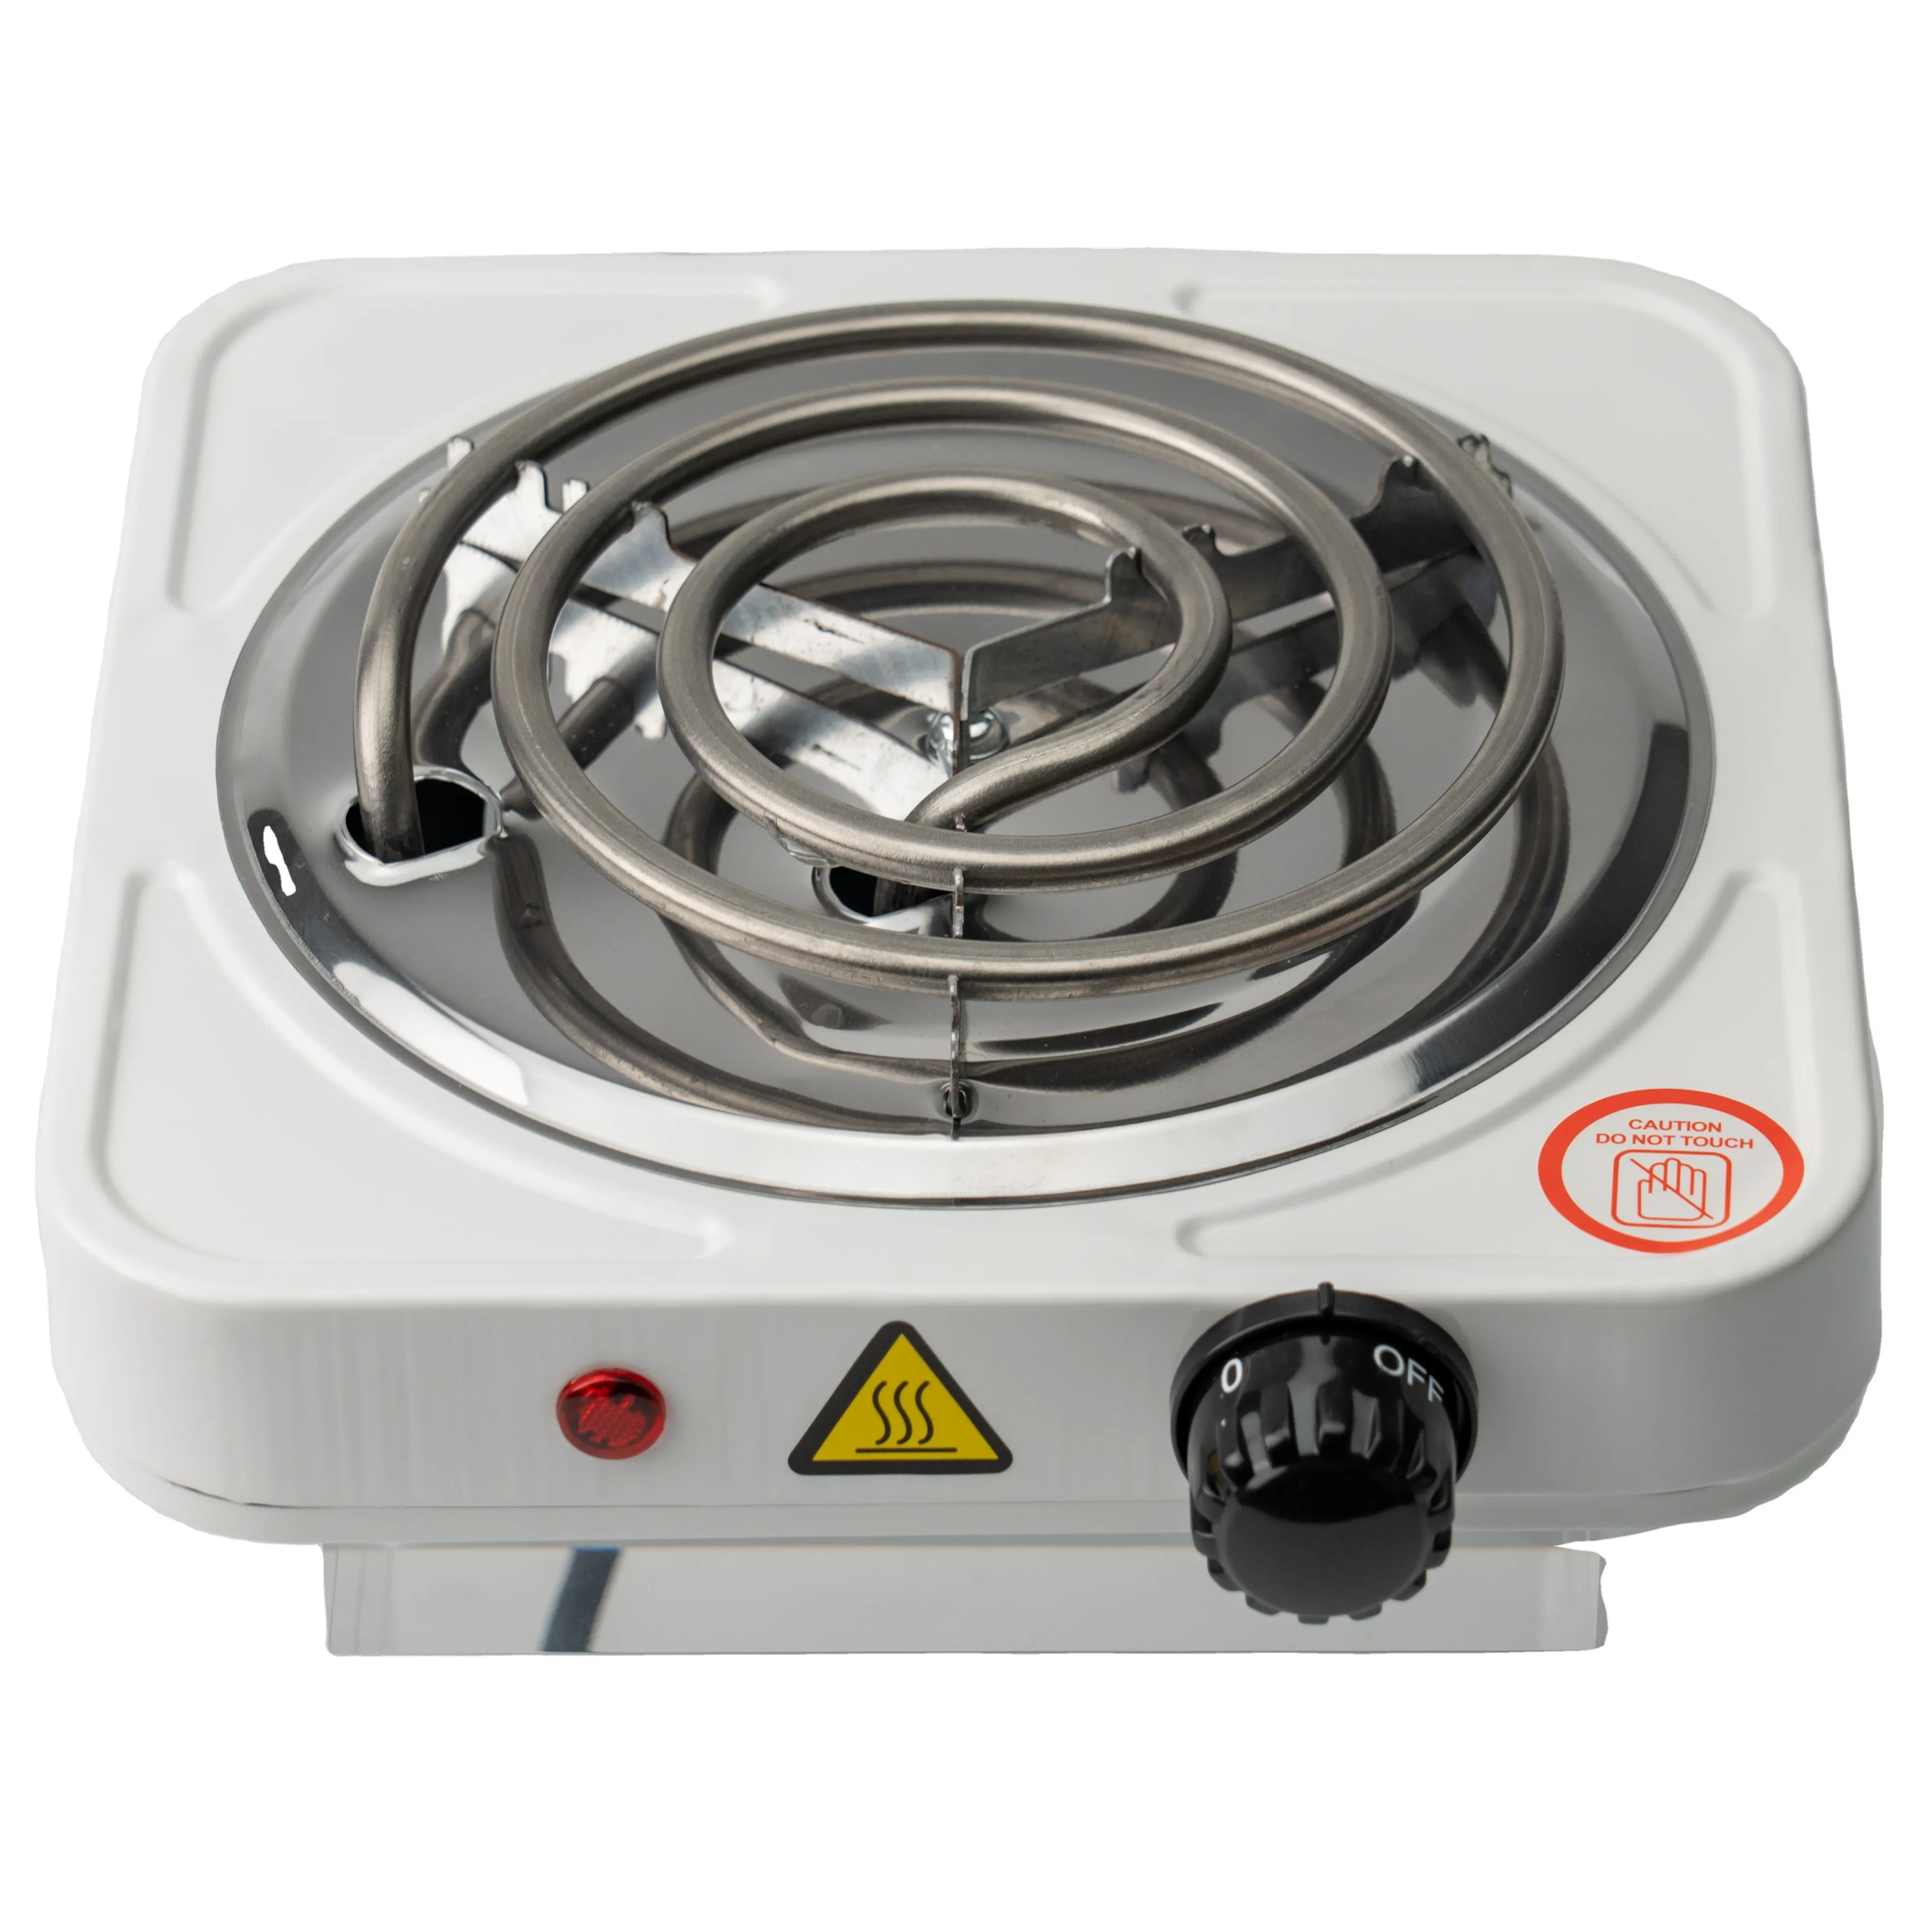 1000W Small Kitchen Appliances Mini Multi Cooker Hot Plates For Cooking Electric Stove Hotplate Electric Stove Single Burner